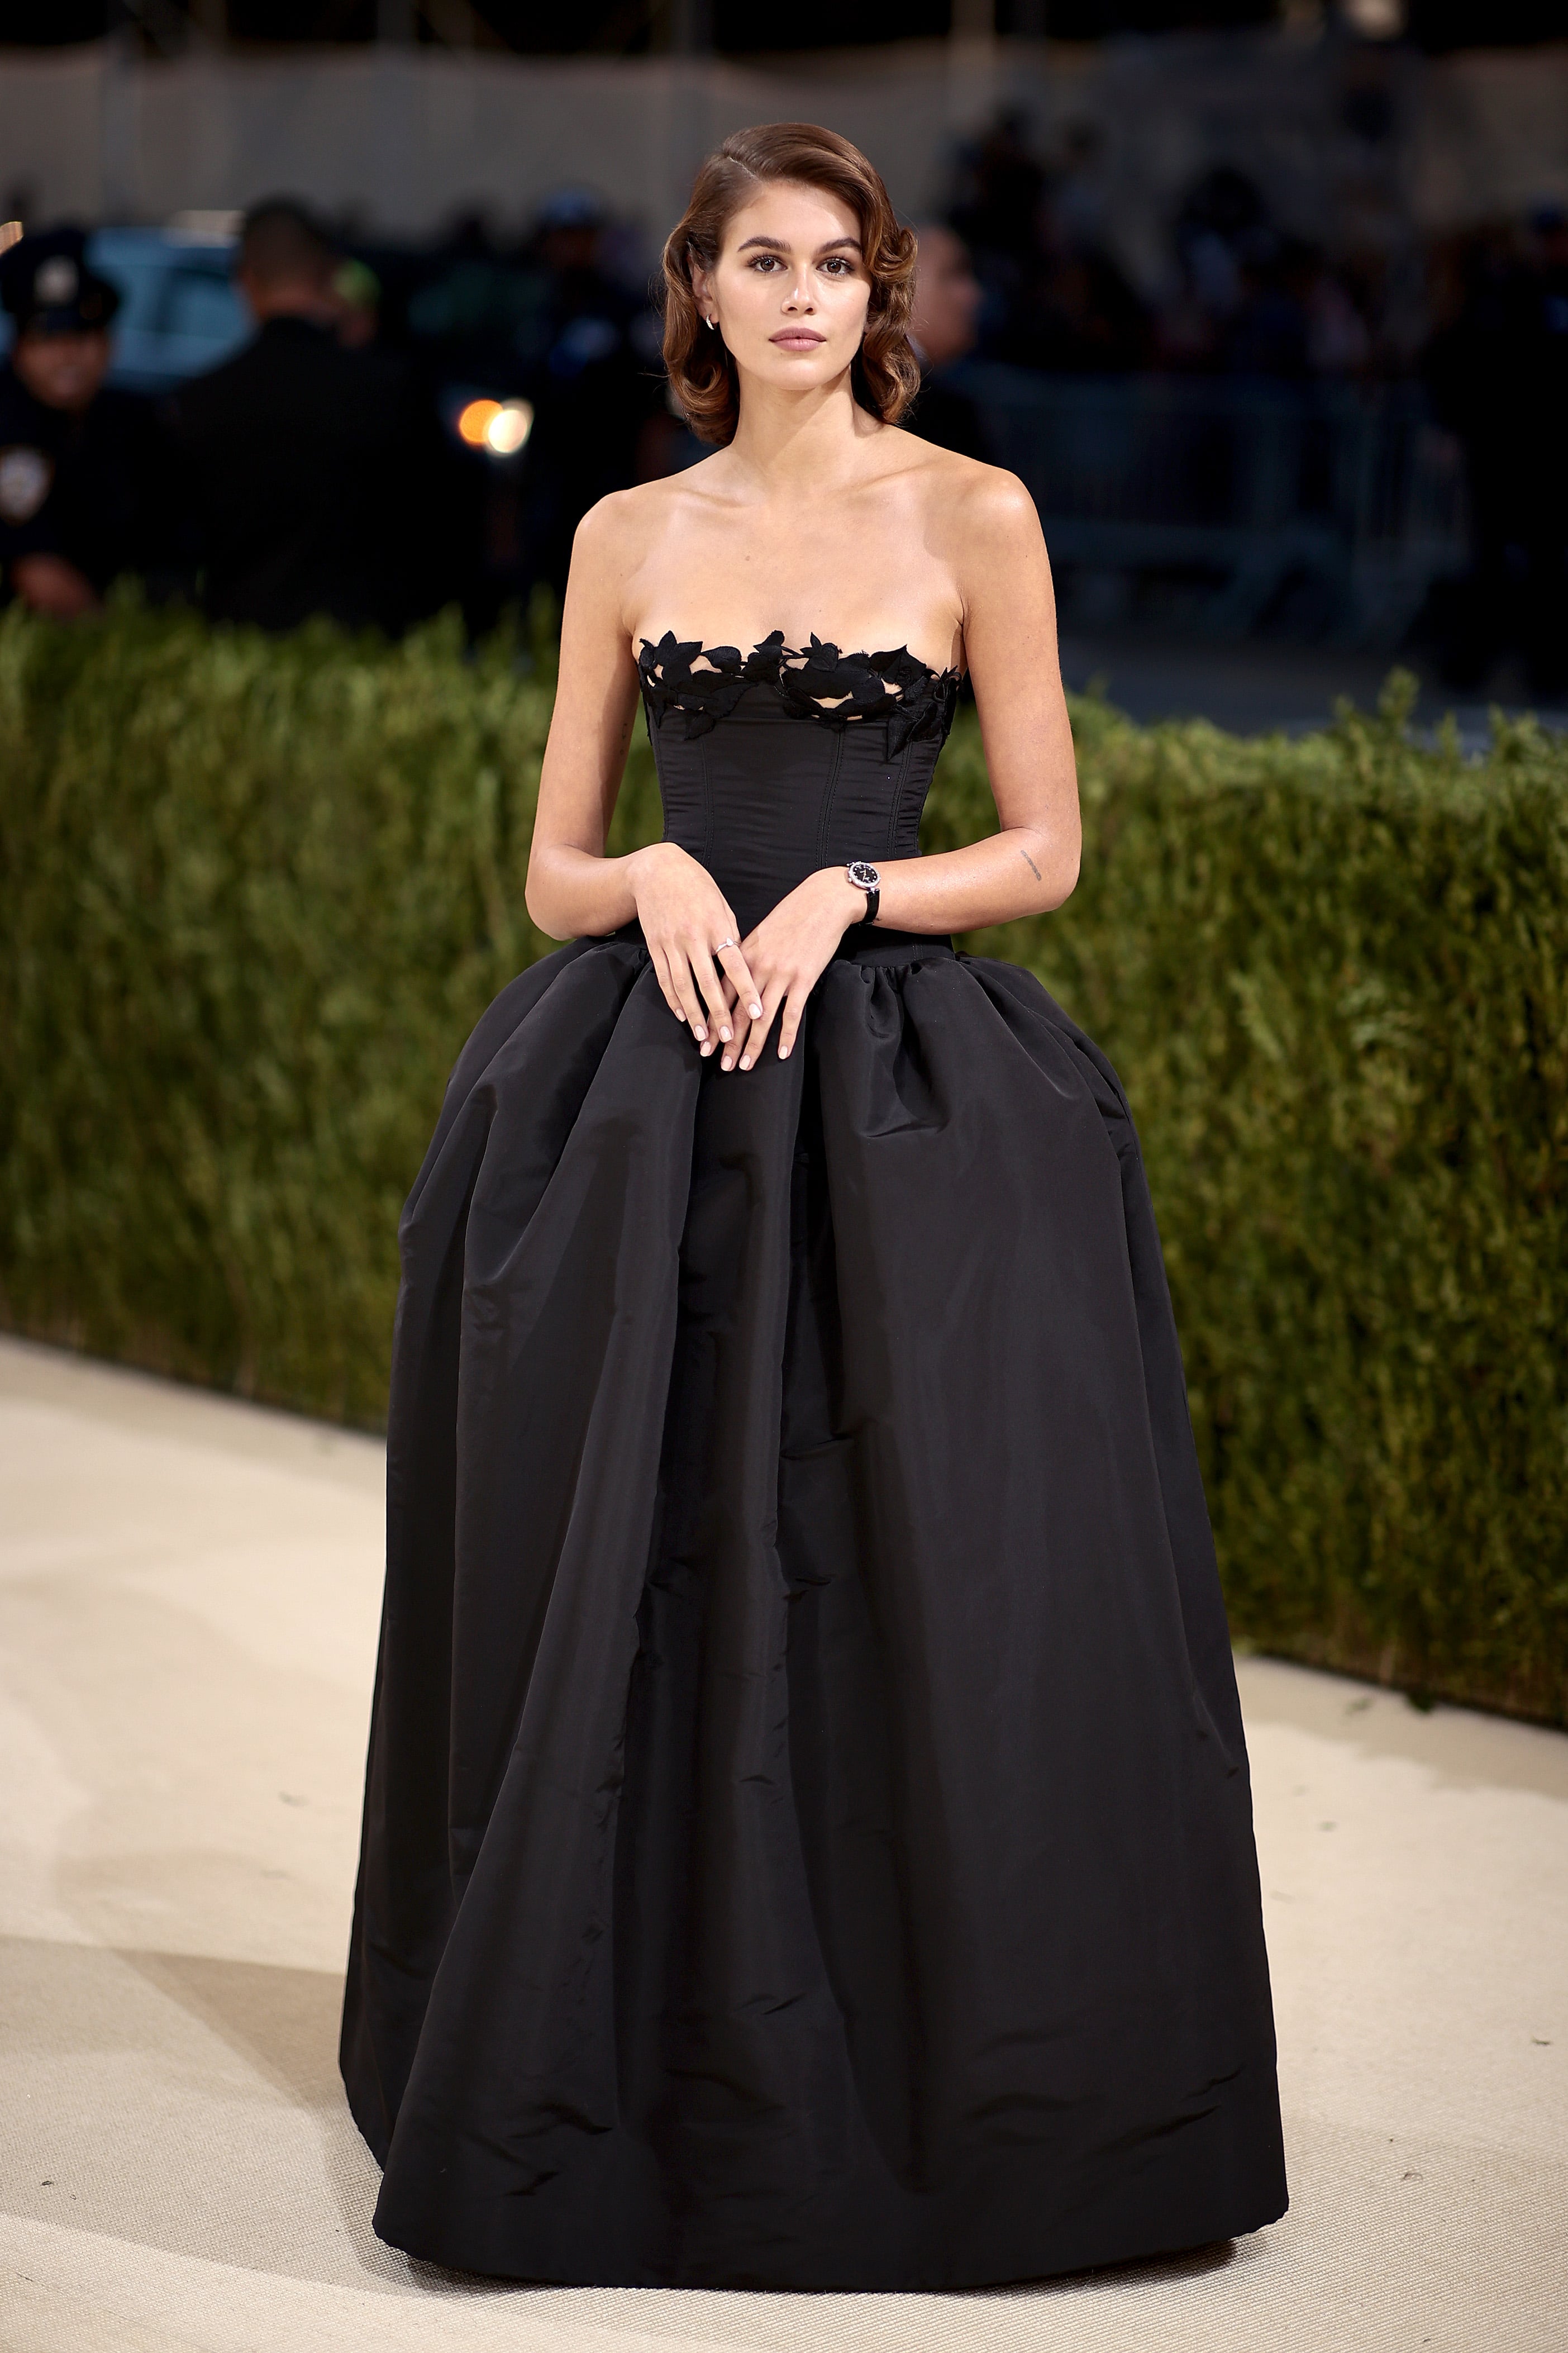 10 Met Gala Looks Inspired by Hollywood's Most Fashionable Icons